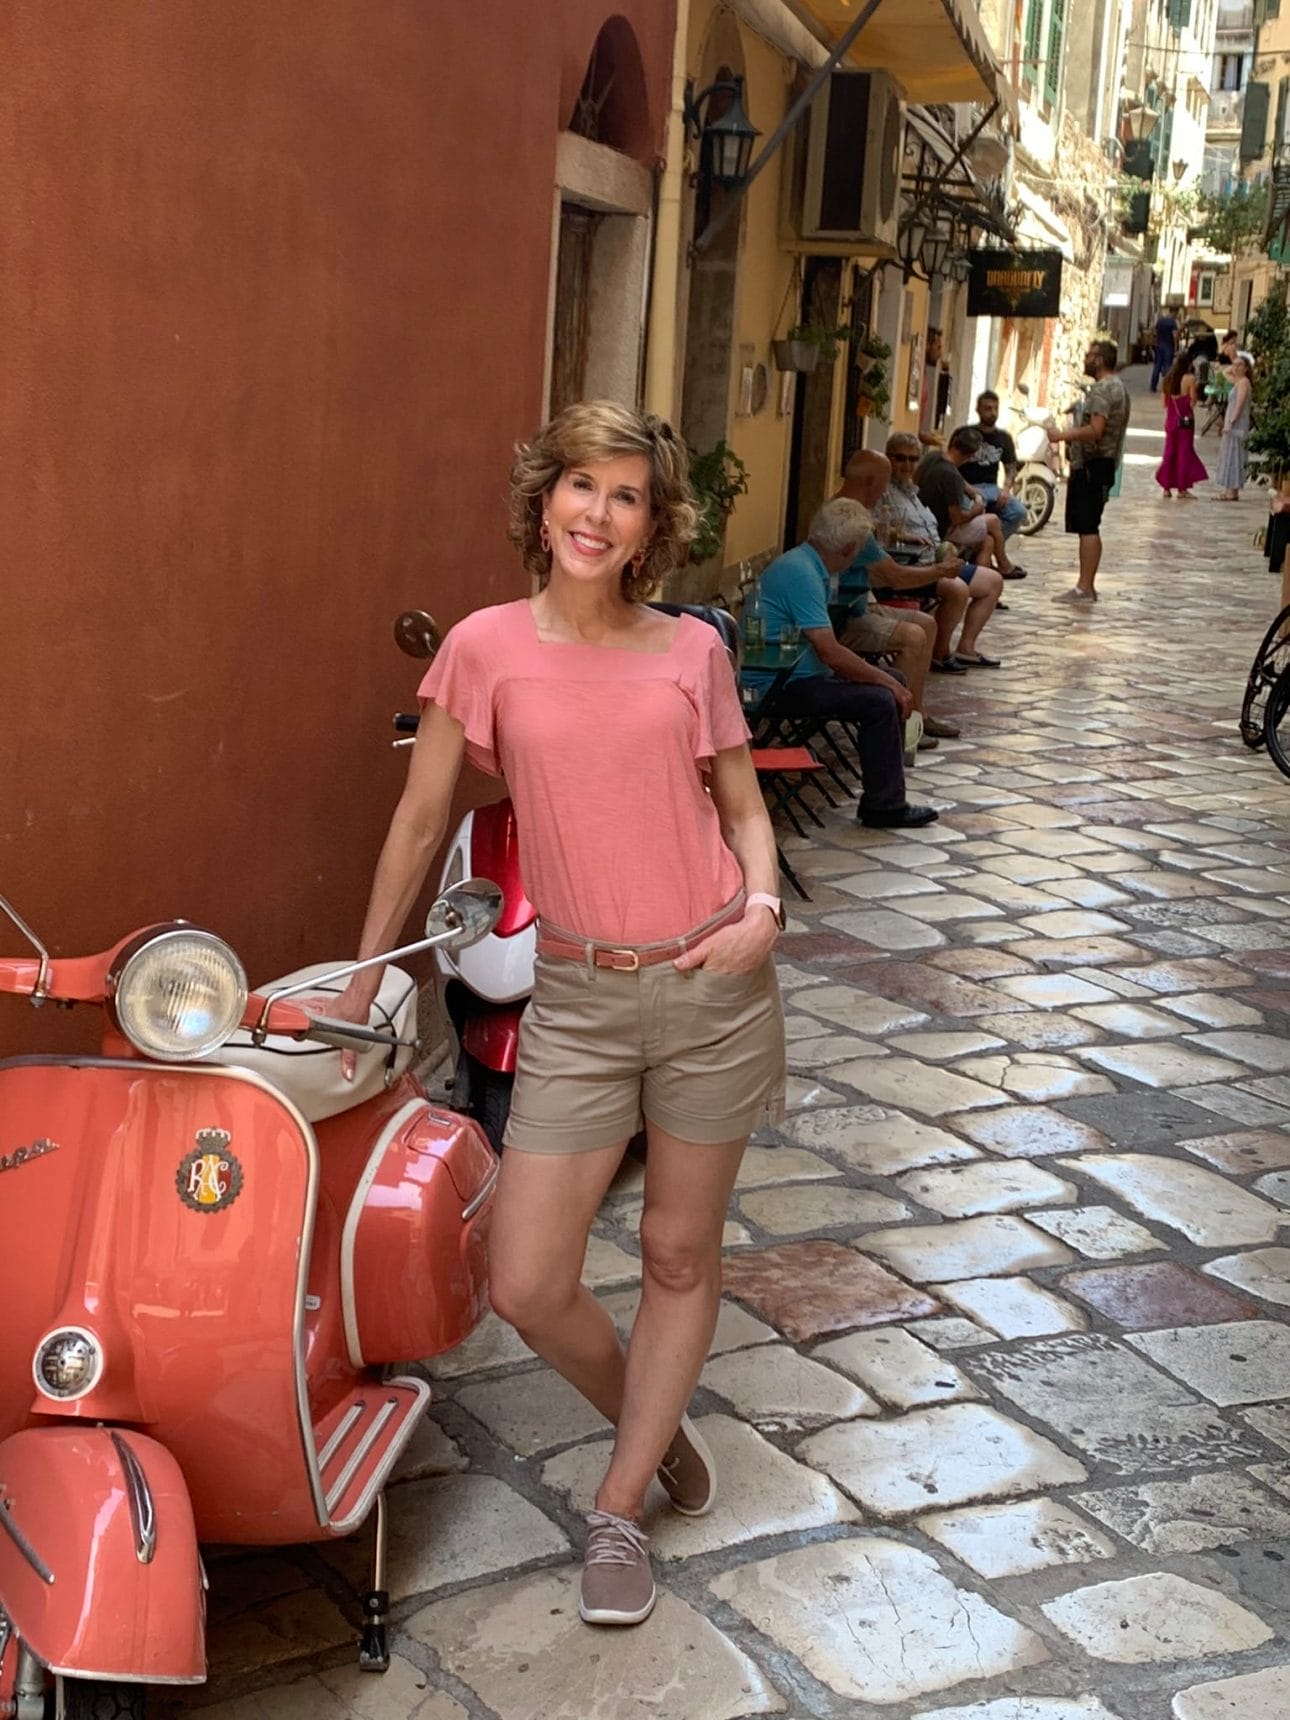 woman standing next to moped in the streets of dubrovnick